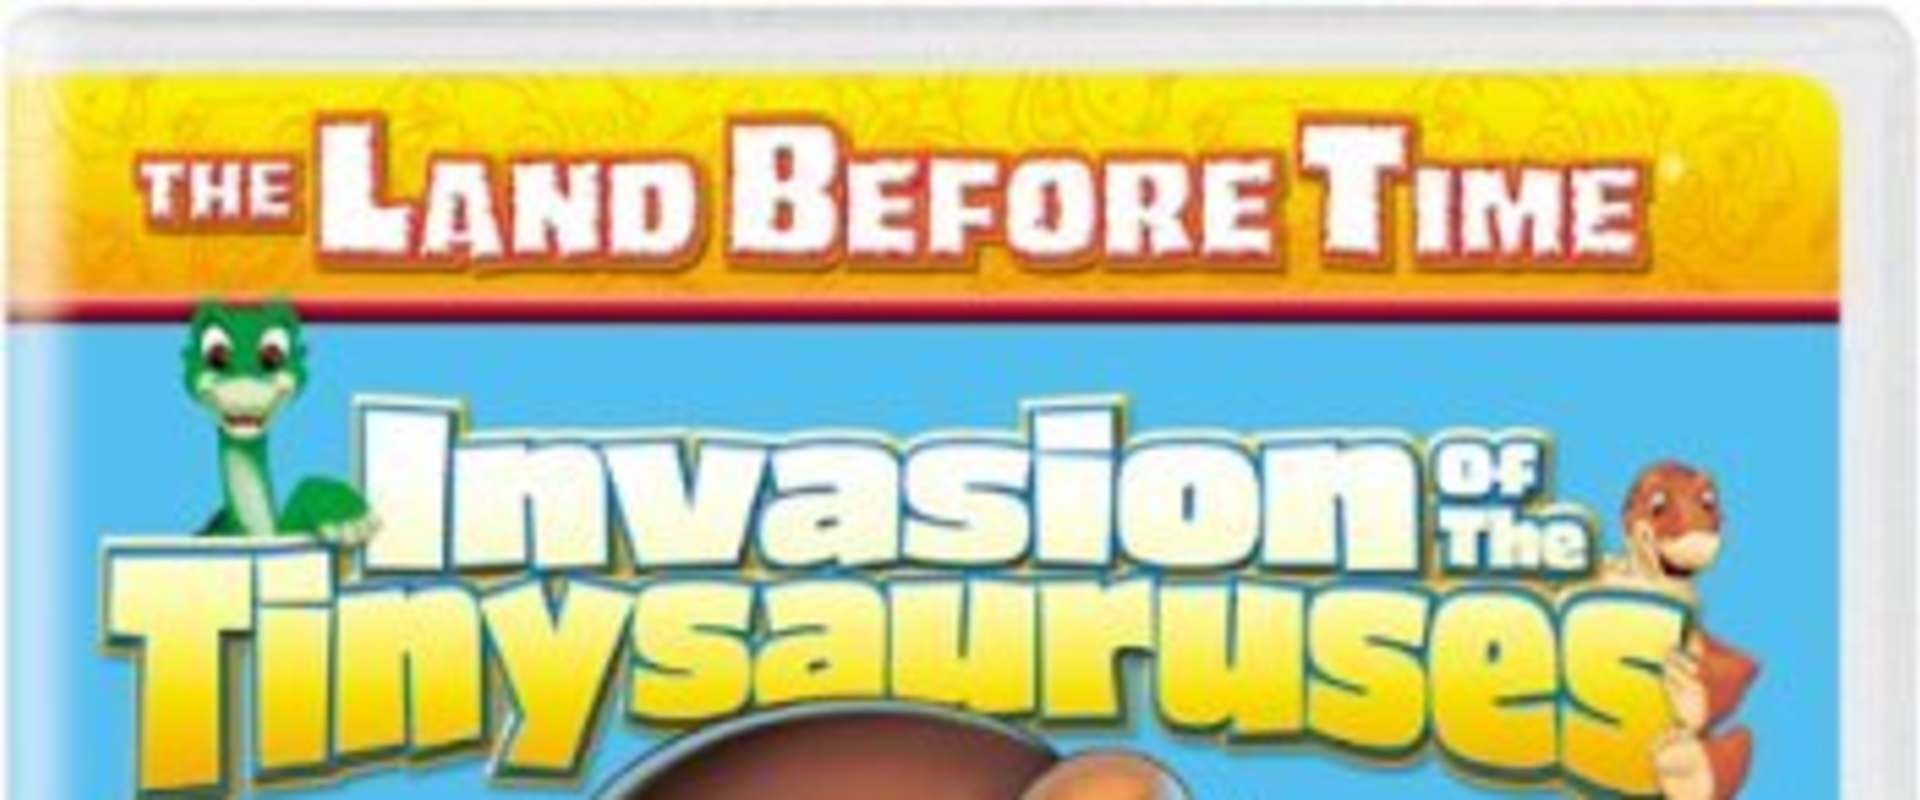 The Land Before Time XI: Invasion of the Tinysauruses background 1